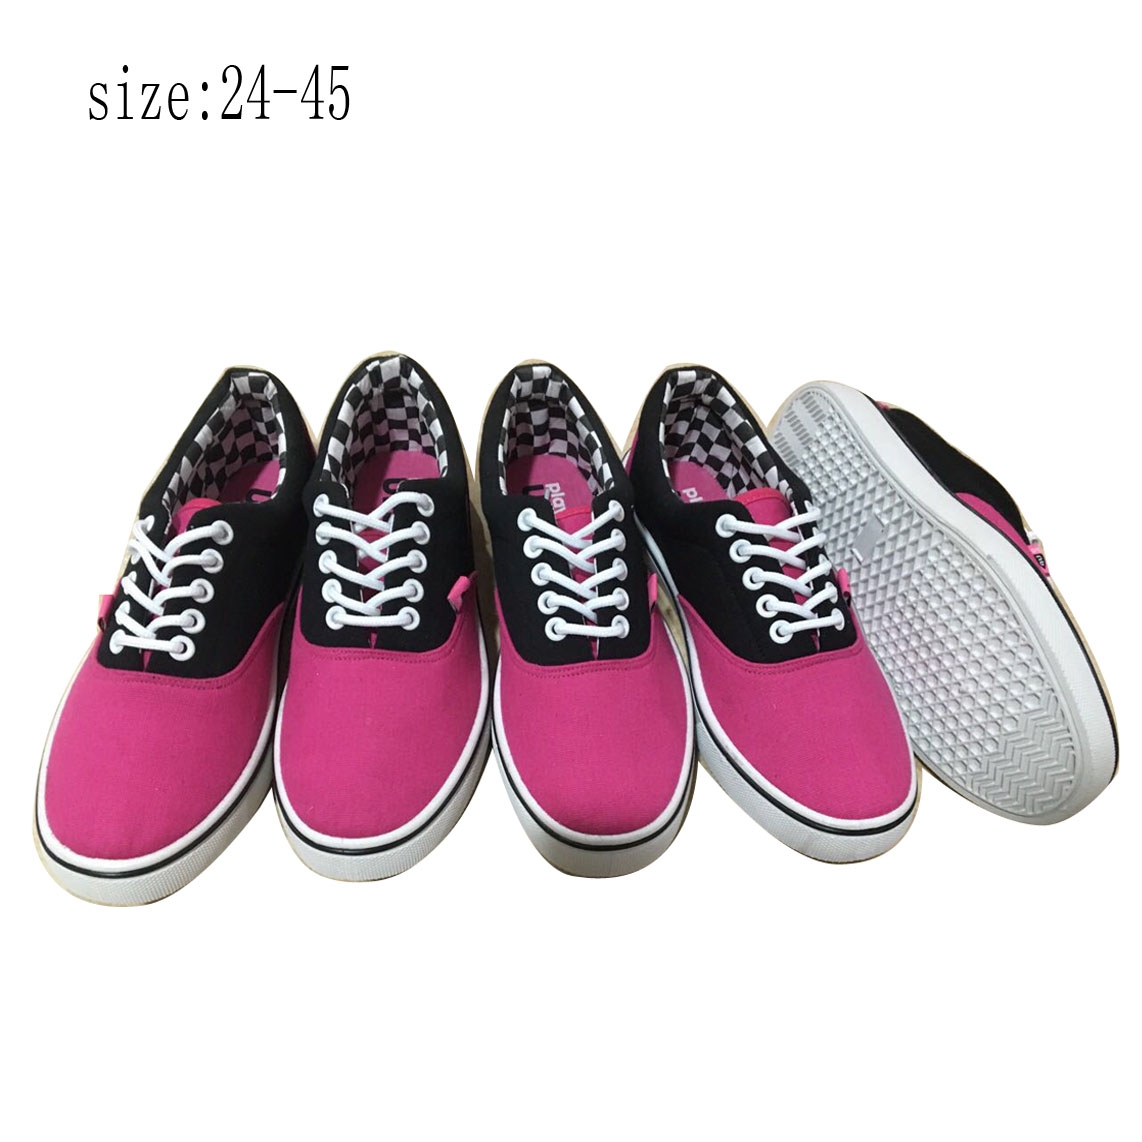 New design women casual shoes canvas shoes (HP19517-13) 1. ITEM...